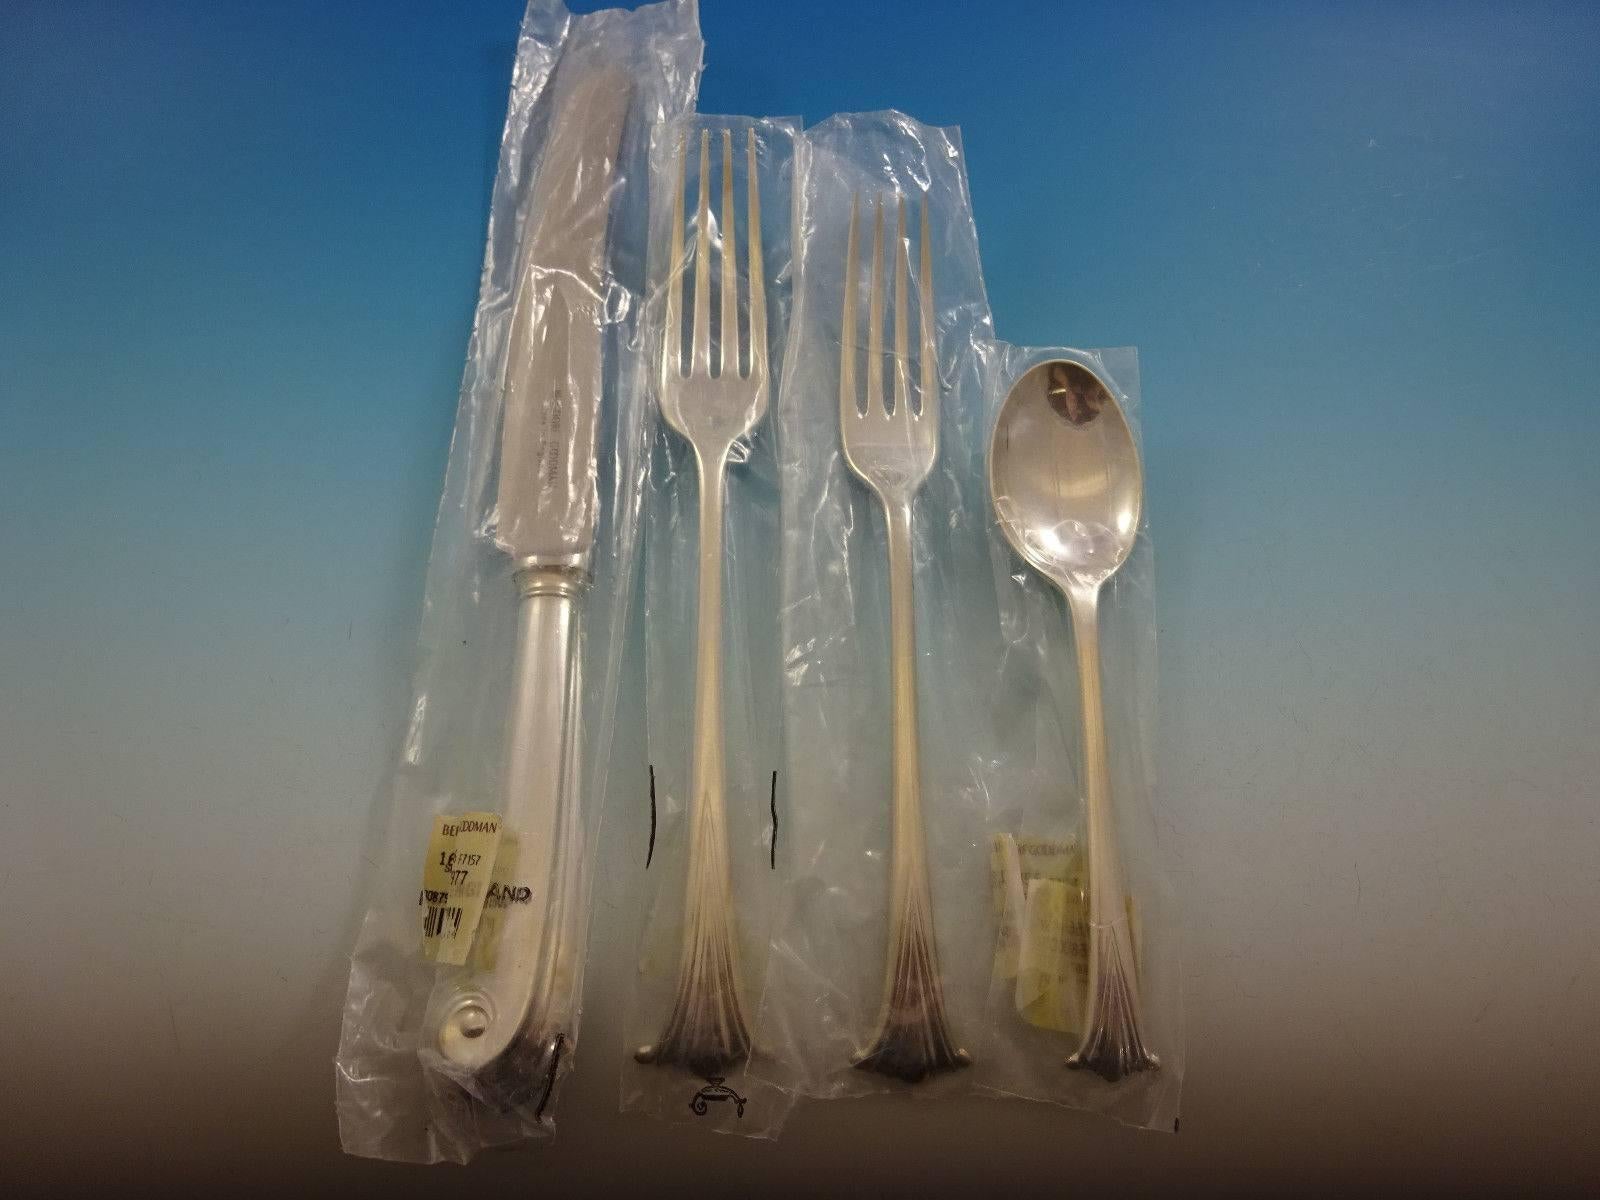 New, unused English Onslow by CJ Vander English silver plated dinner size flatware set - 60 pieces. This set includes: 

12 dinner knives, pistol grip, 9 1/2